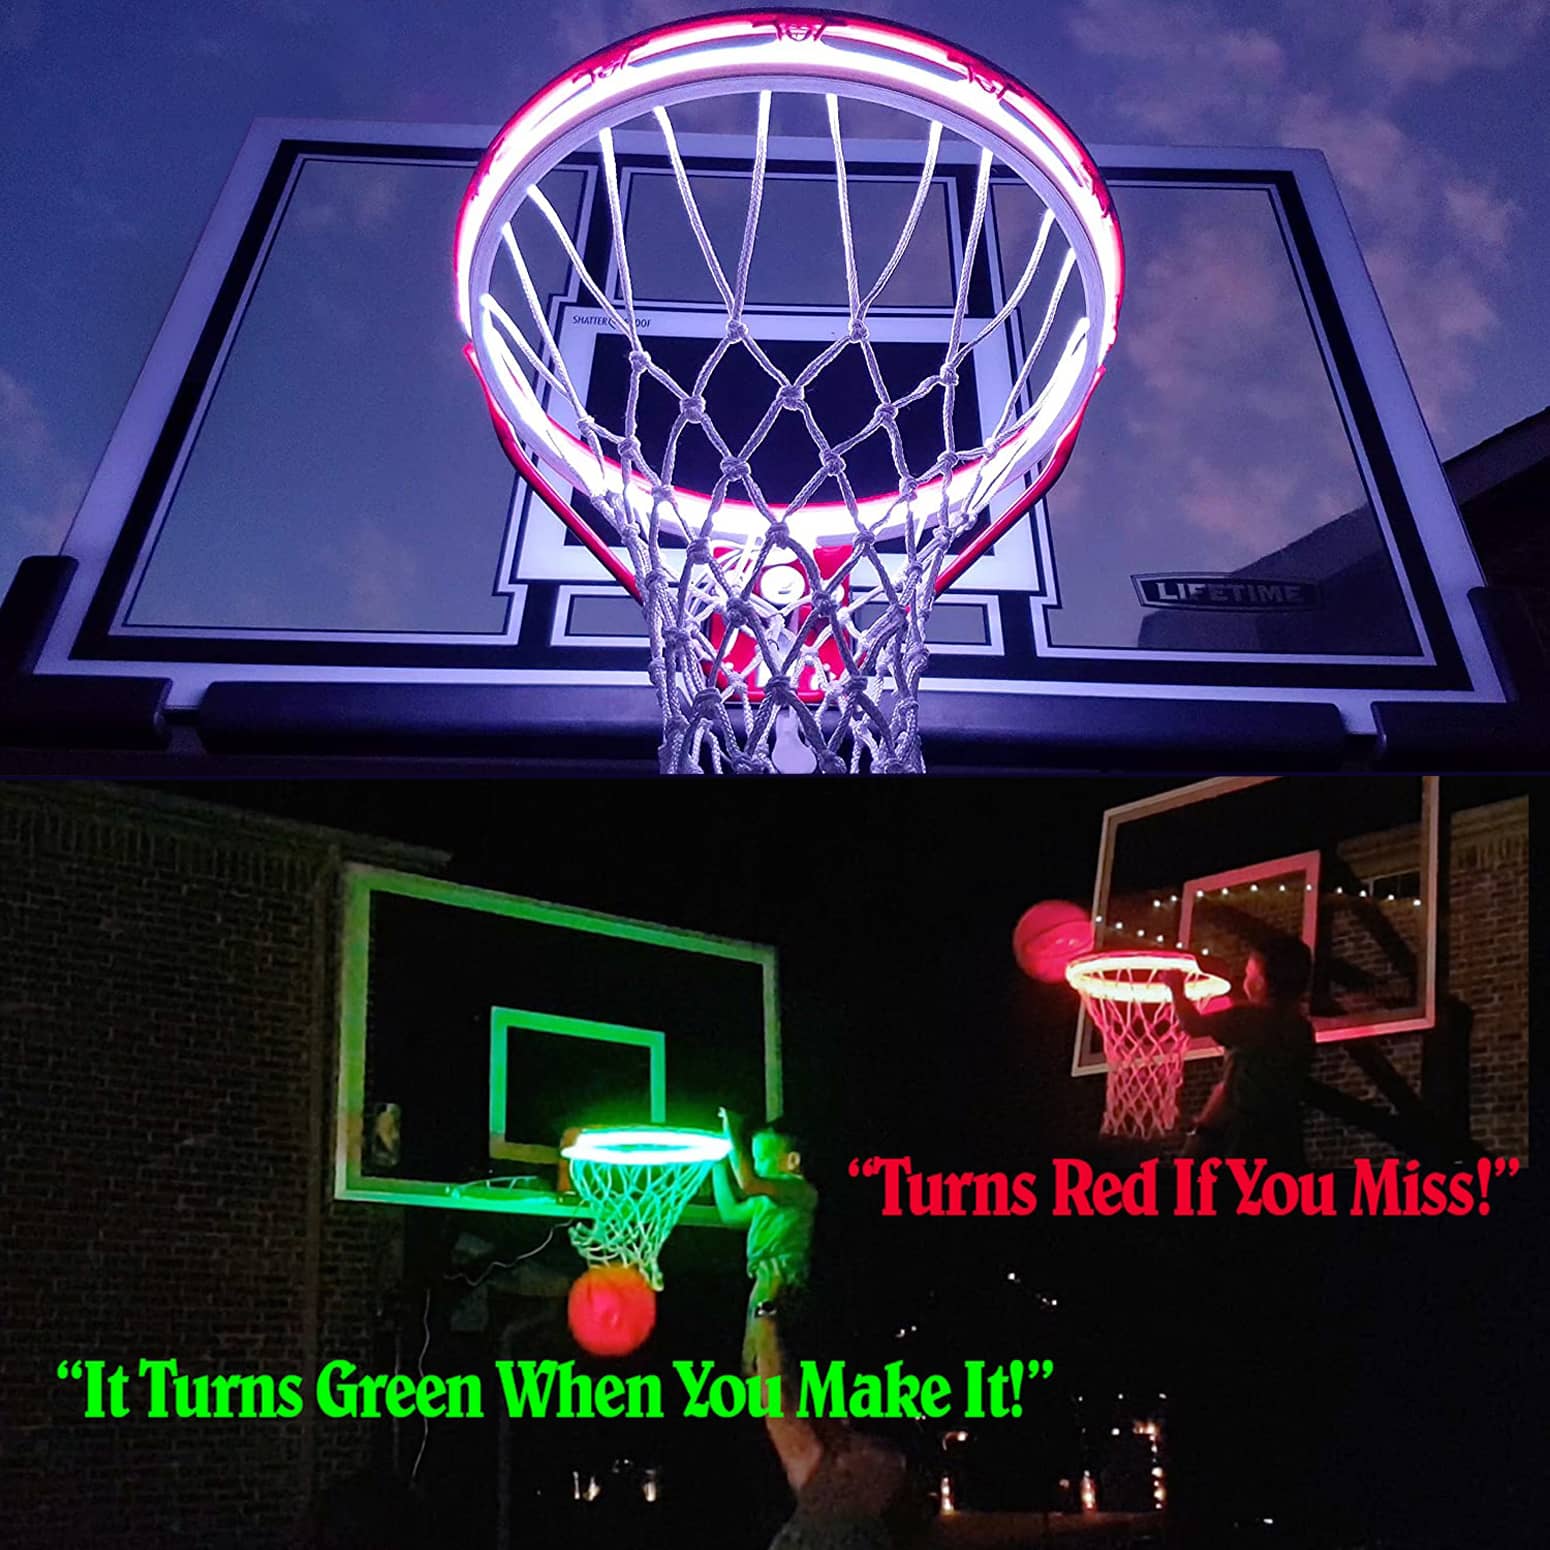 Illuminates When You Score HOME SMART BRITE HOOPS Multi-Colored LED Basketball Rim Lights for All-Day Play Red Solar Powered 8 Unique Patterns Blue & Green Colors Water-Resistant 